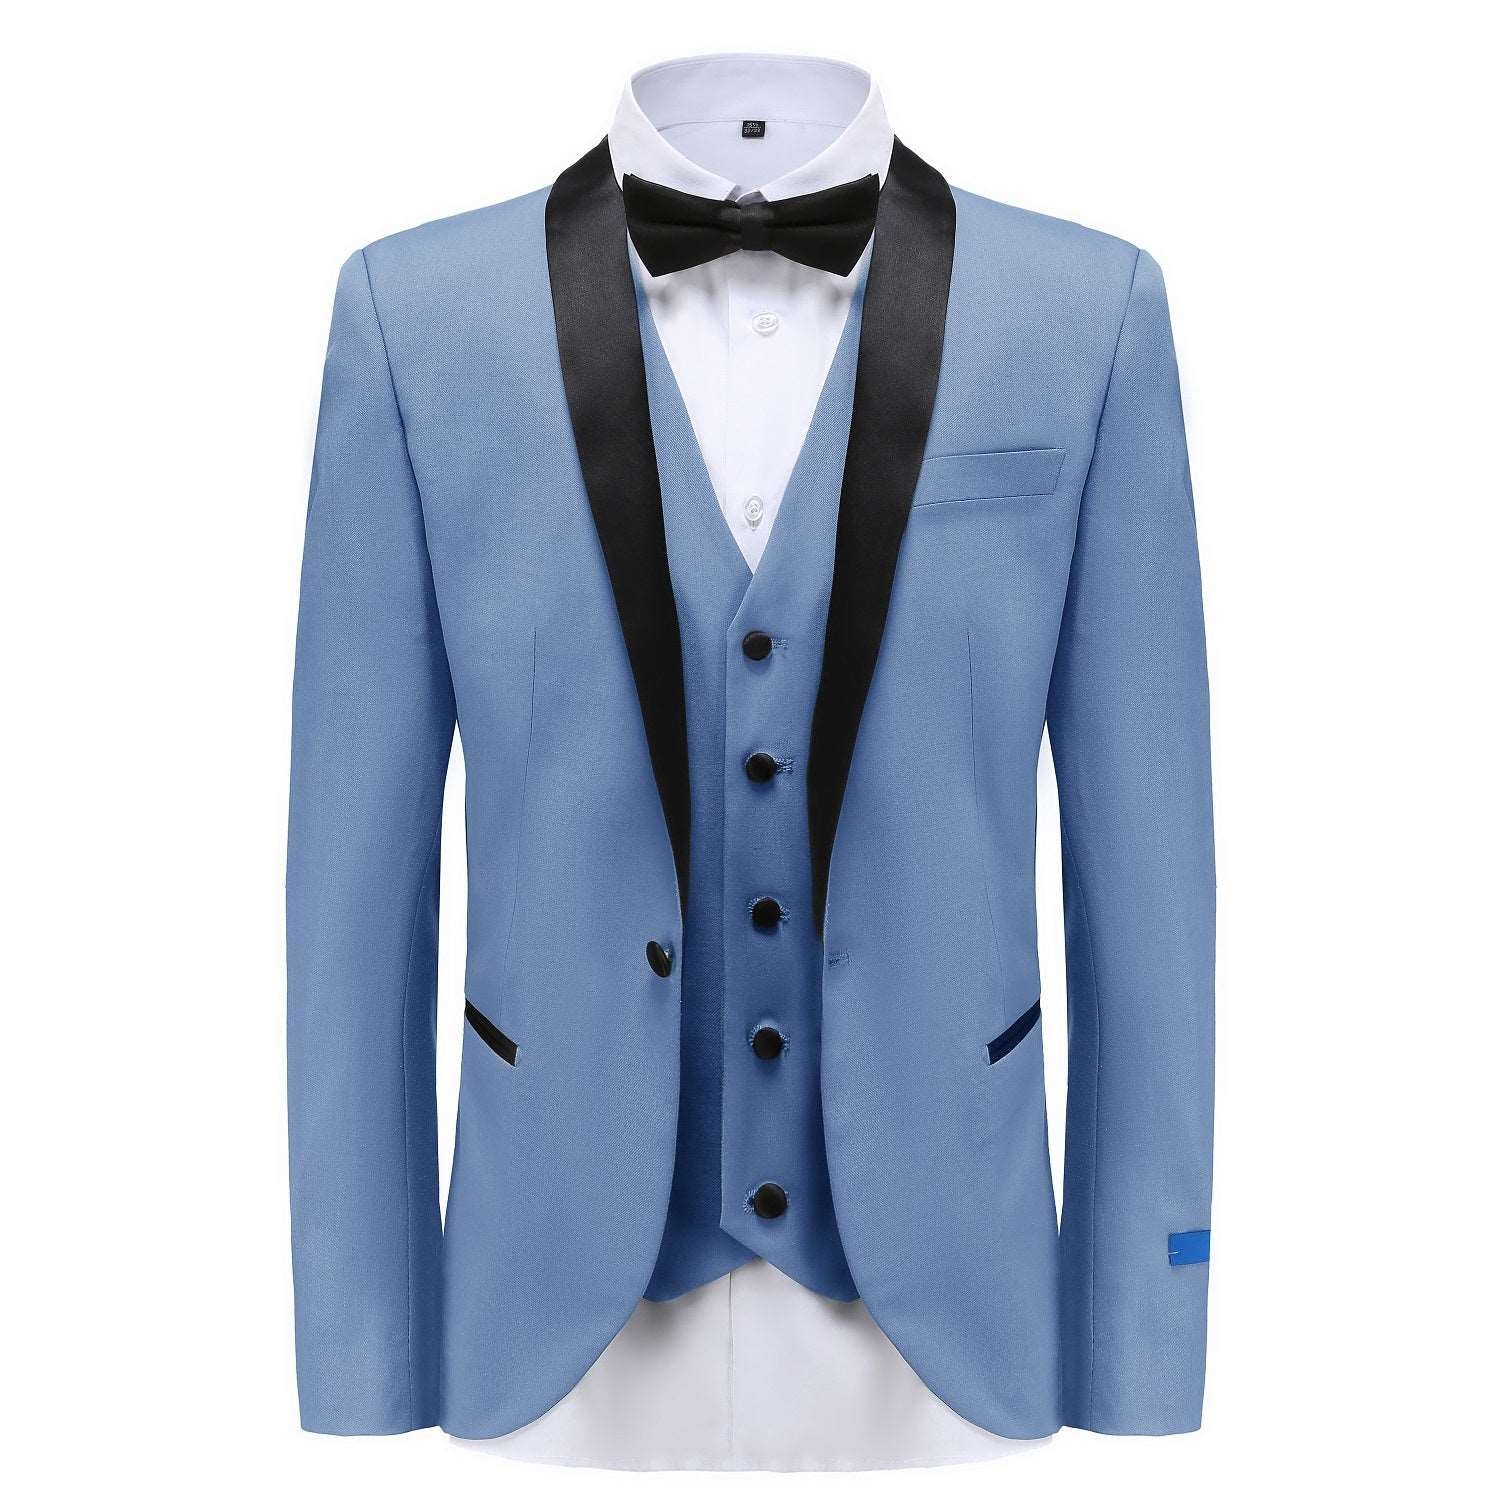 Mens Vested Shawl Lapel Tuxedo With Satin Trim in Sapphire Blue